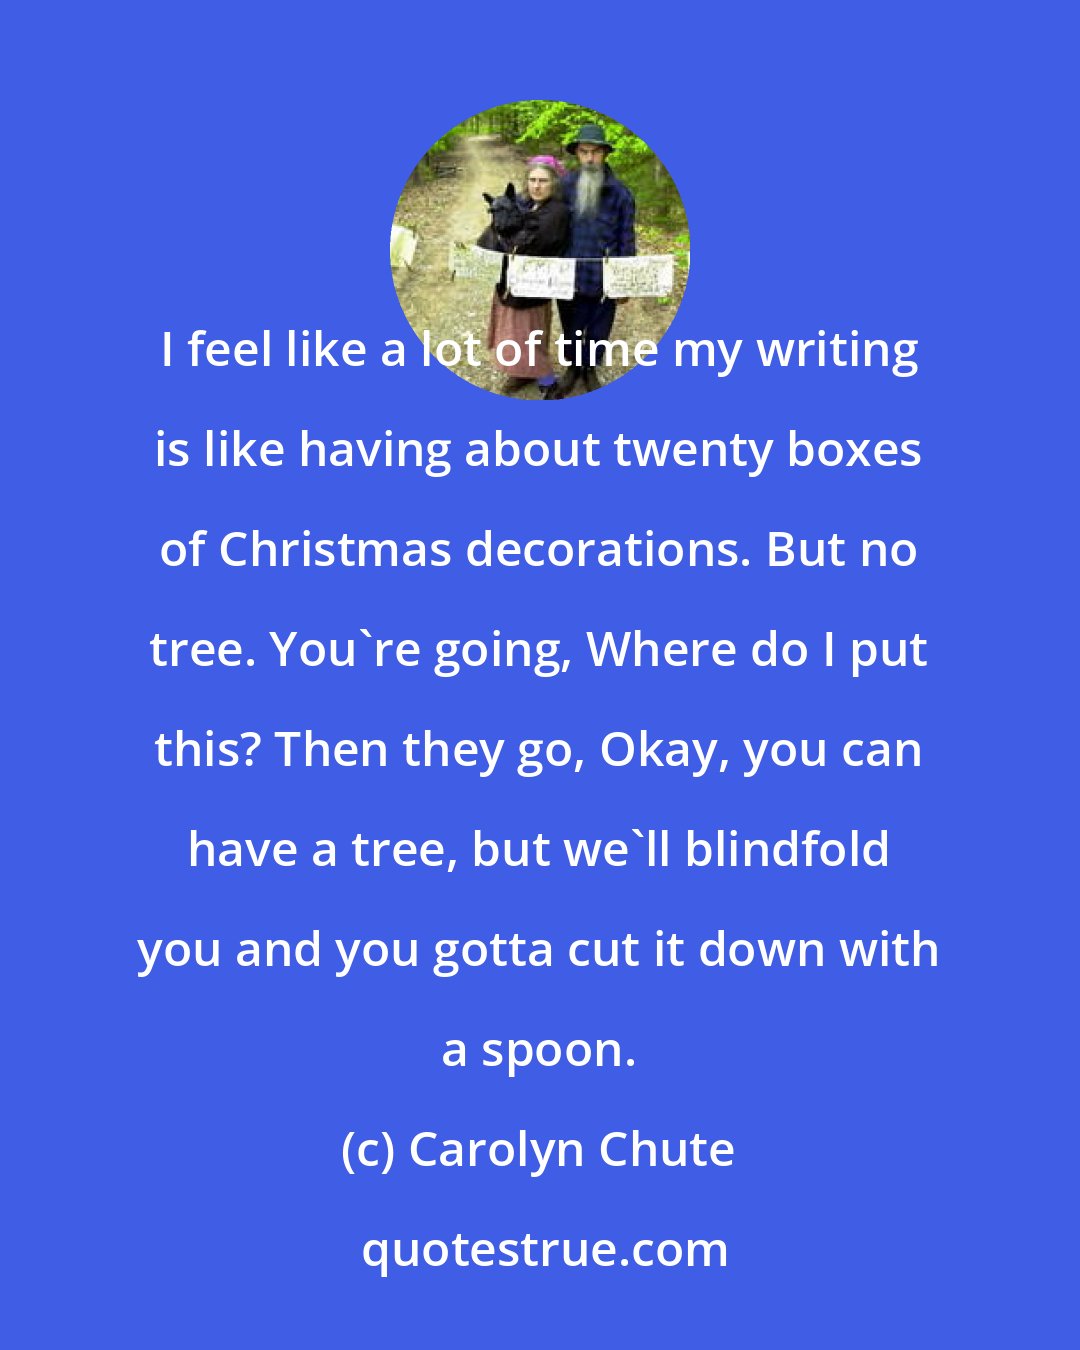 Carolyn Chute: I feel like a lot of time my writing is like having about twenty boxes of Christmas decorations. But no tree. You're going, Where do I put this? Then they go, Okay, you can have a tree, but we'll blindfold you and you gotta cut it down with a spoon.